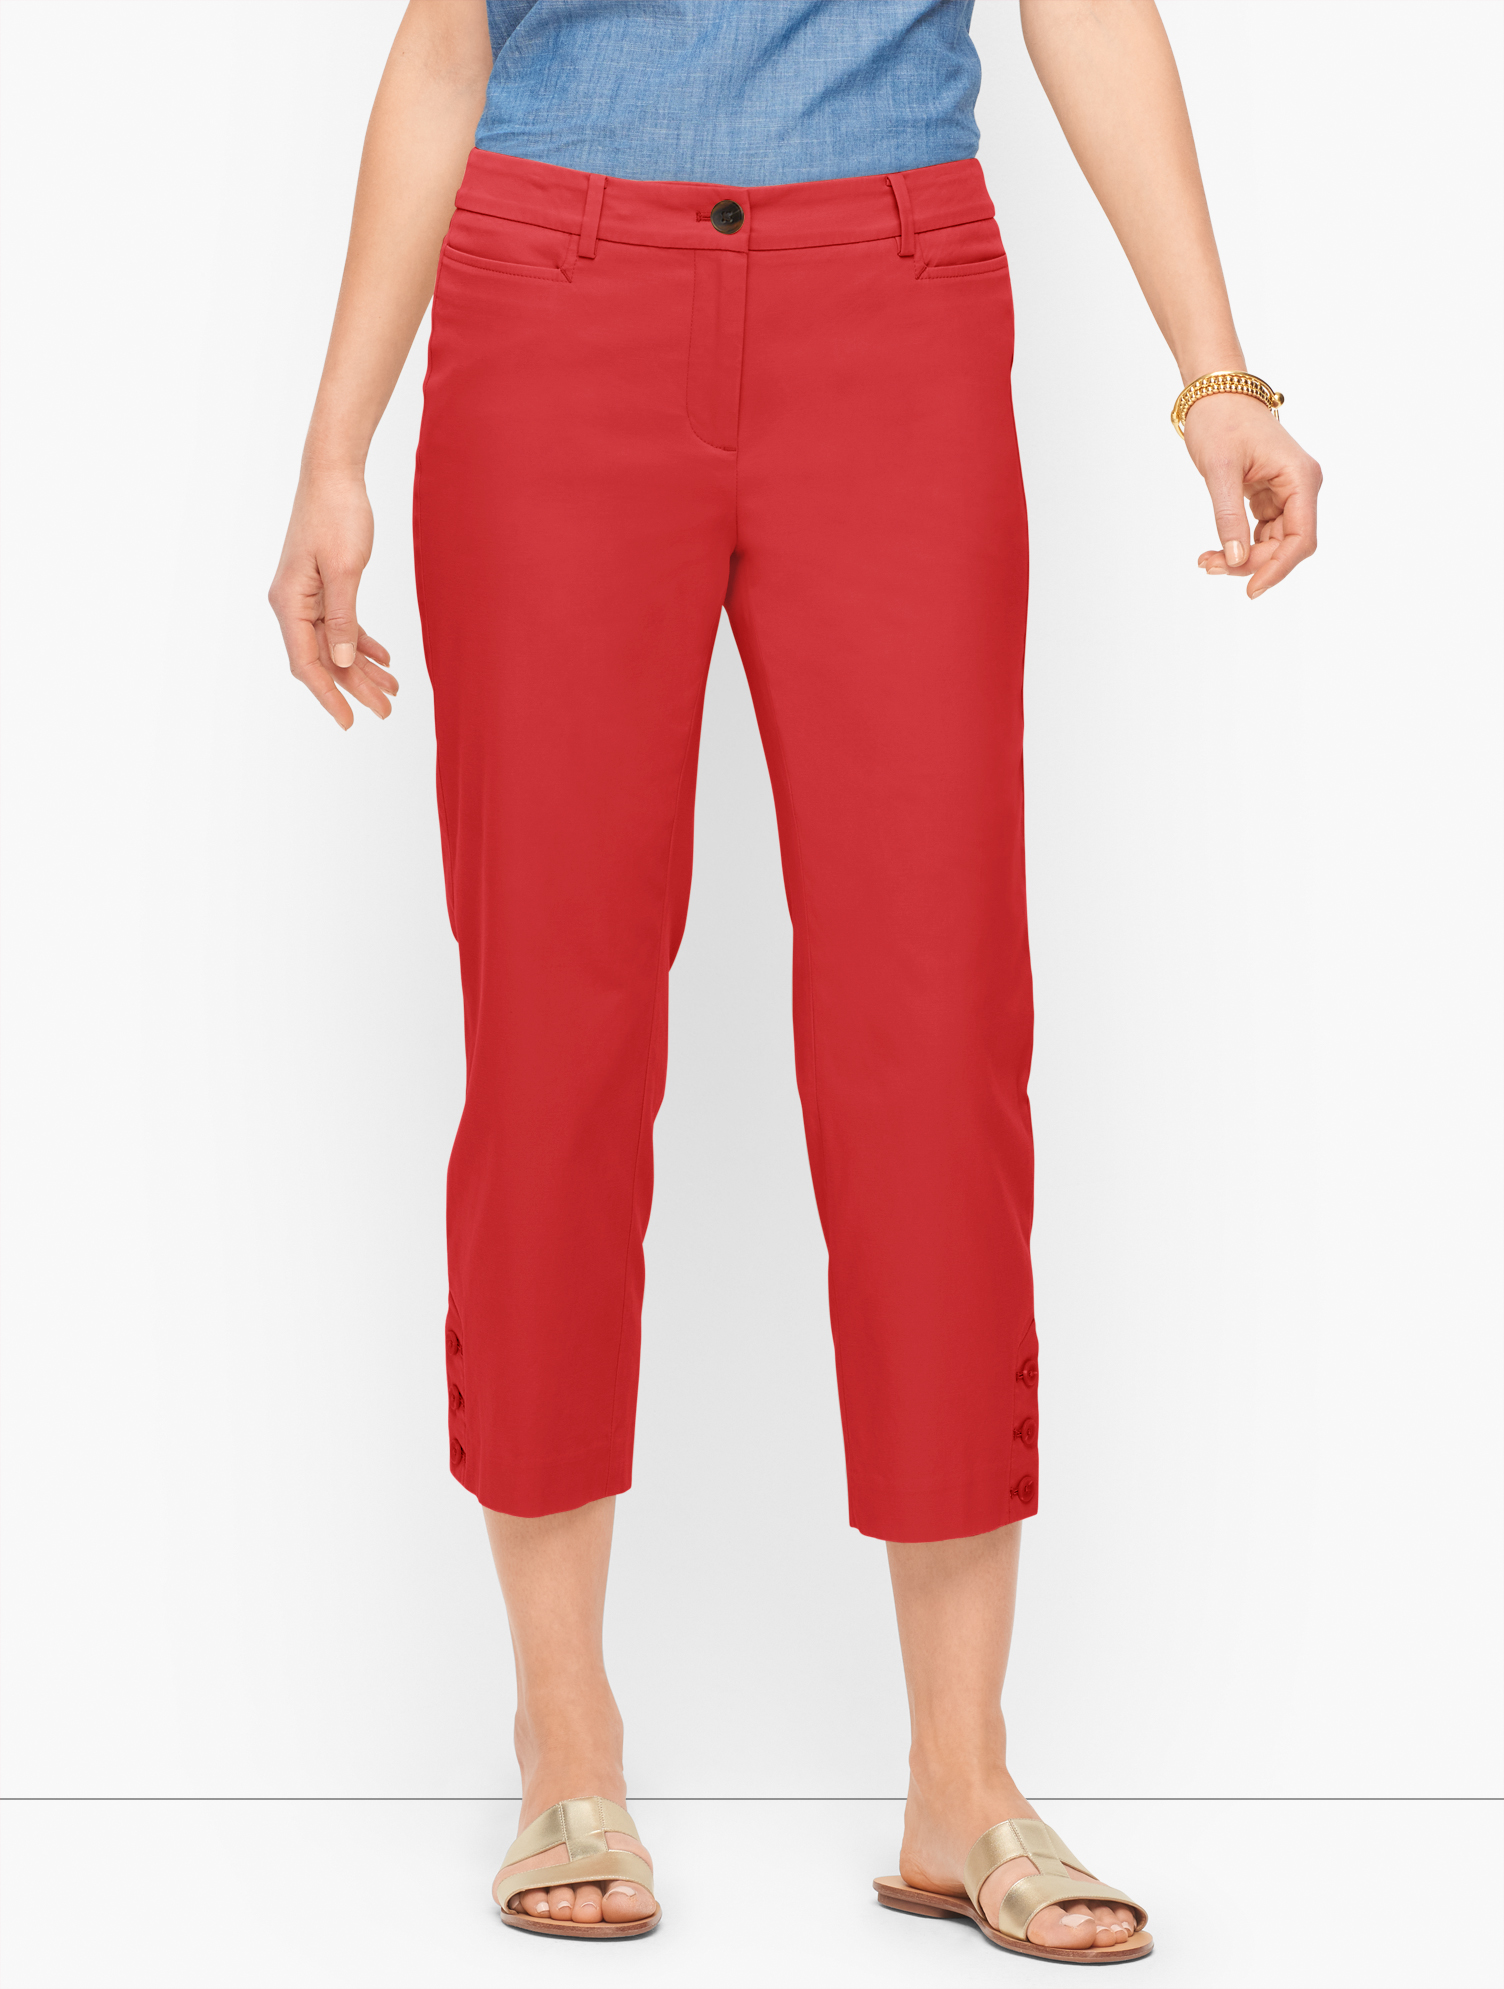 Talbots Petite - Perfect Skimmers Pants - Colors - Red - 2